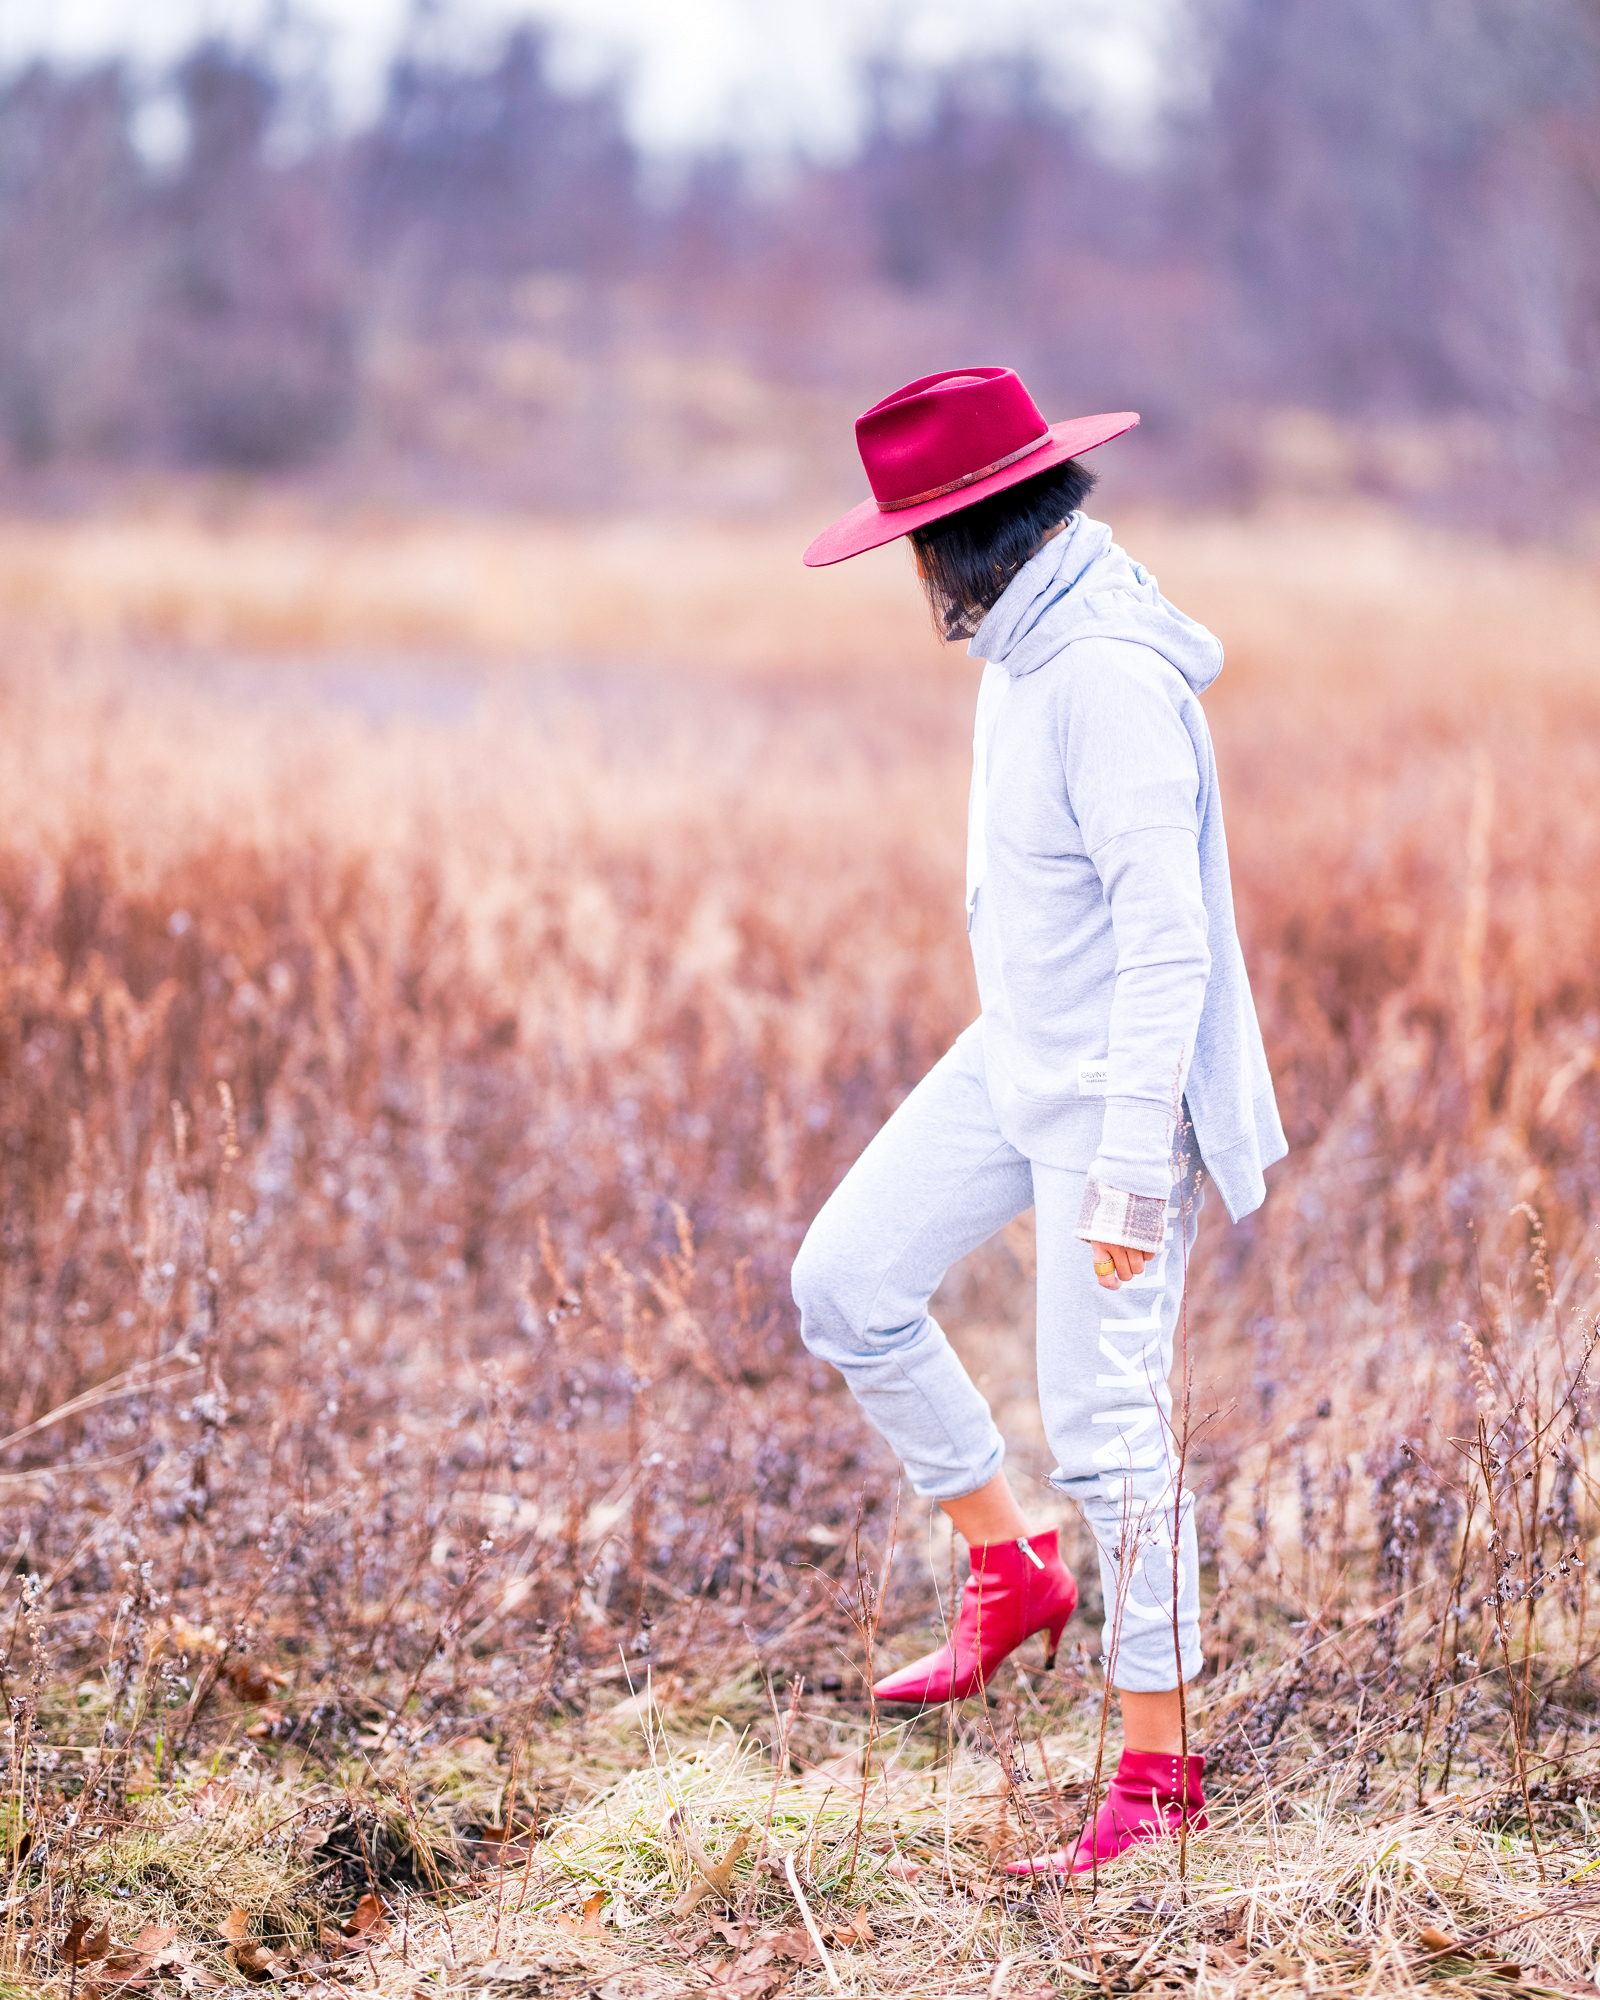 nanphanita jacob is strolling in new jersey with Giovannio  cinnabar hat